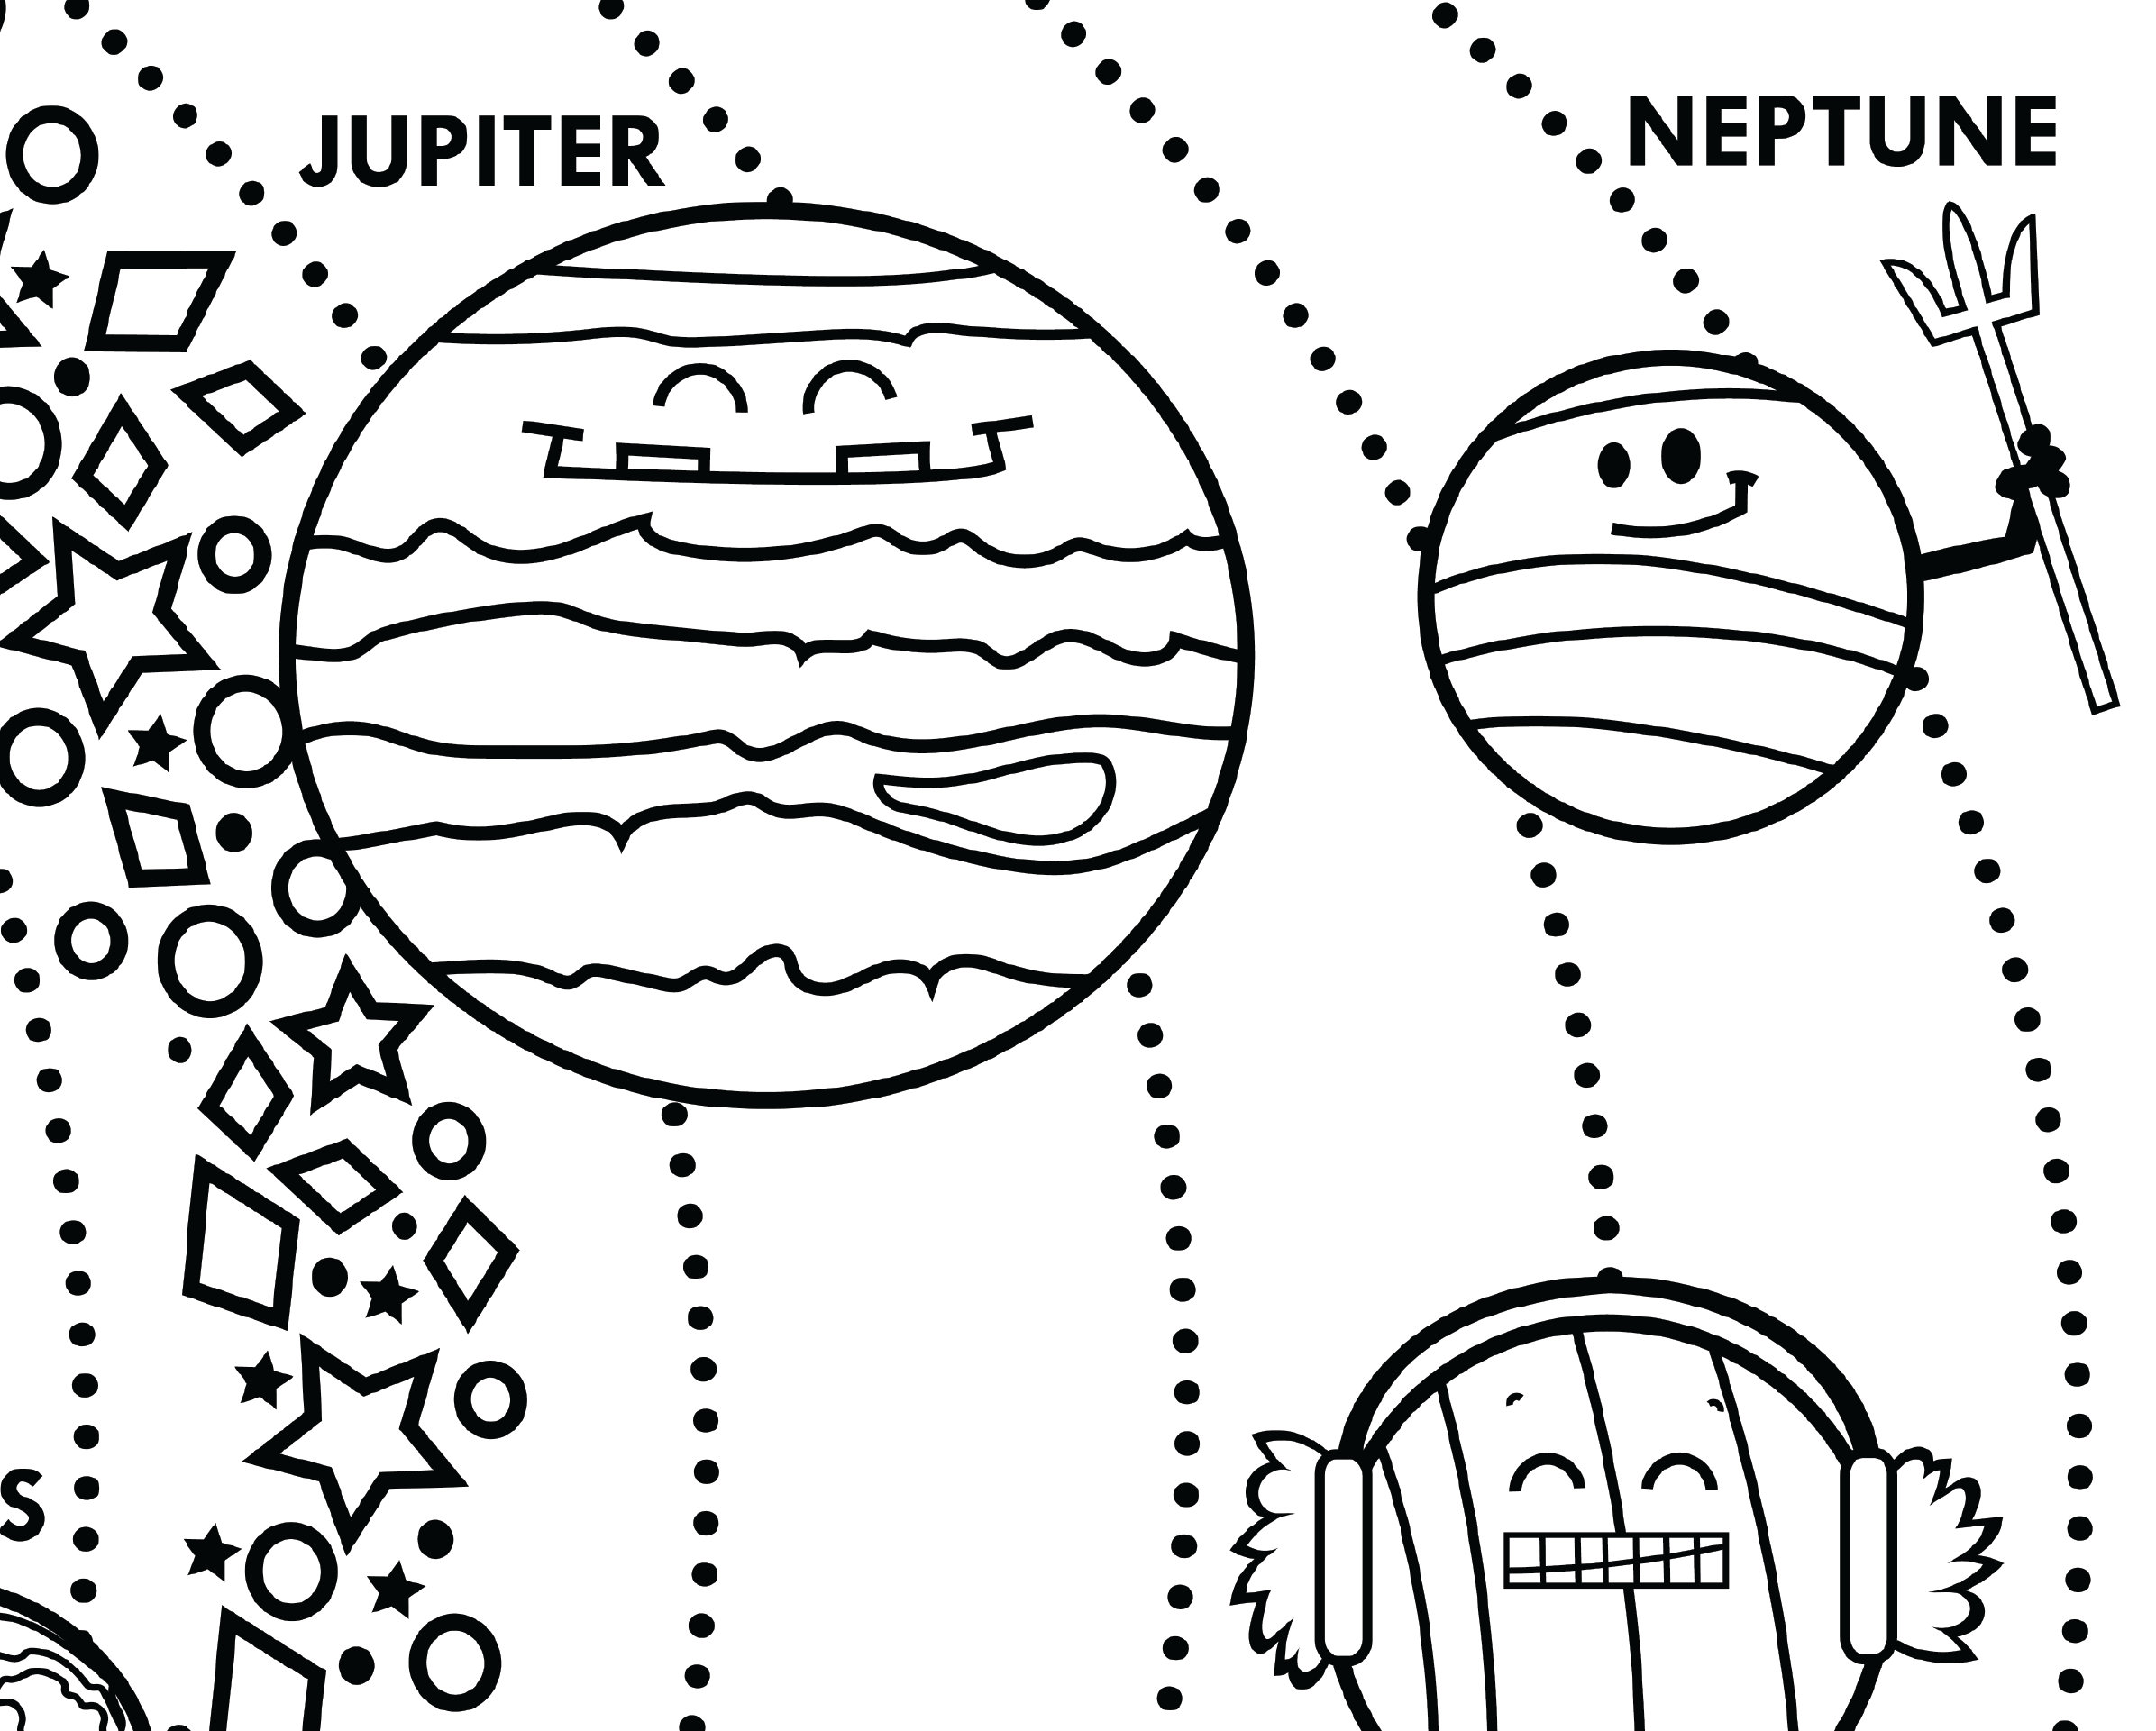 Solar system printable large format coloring poster horizontal layout